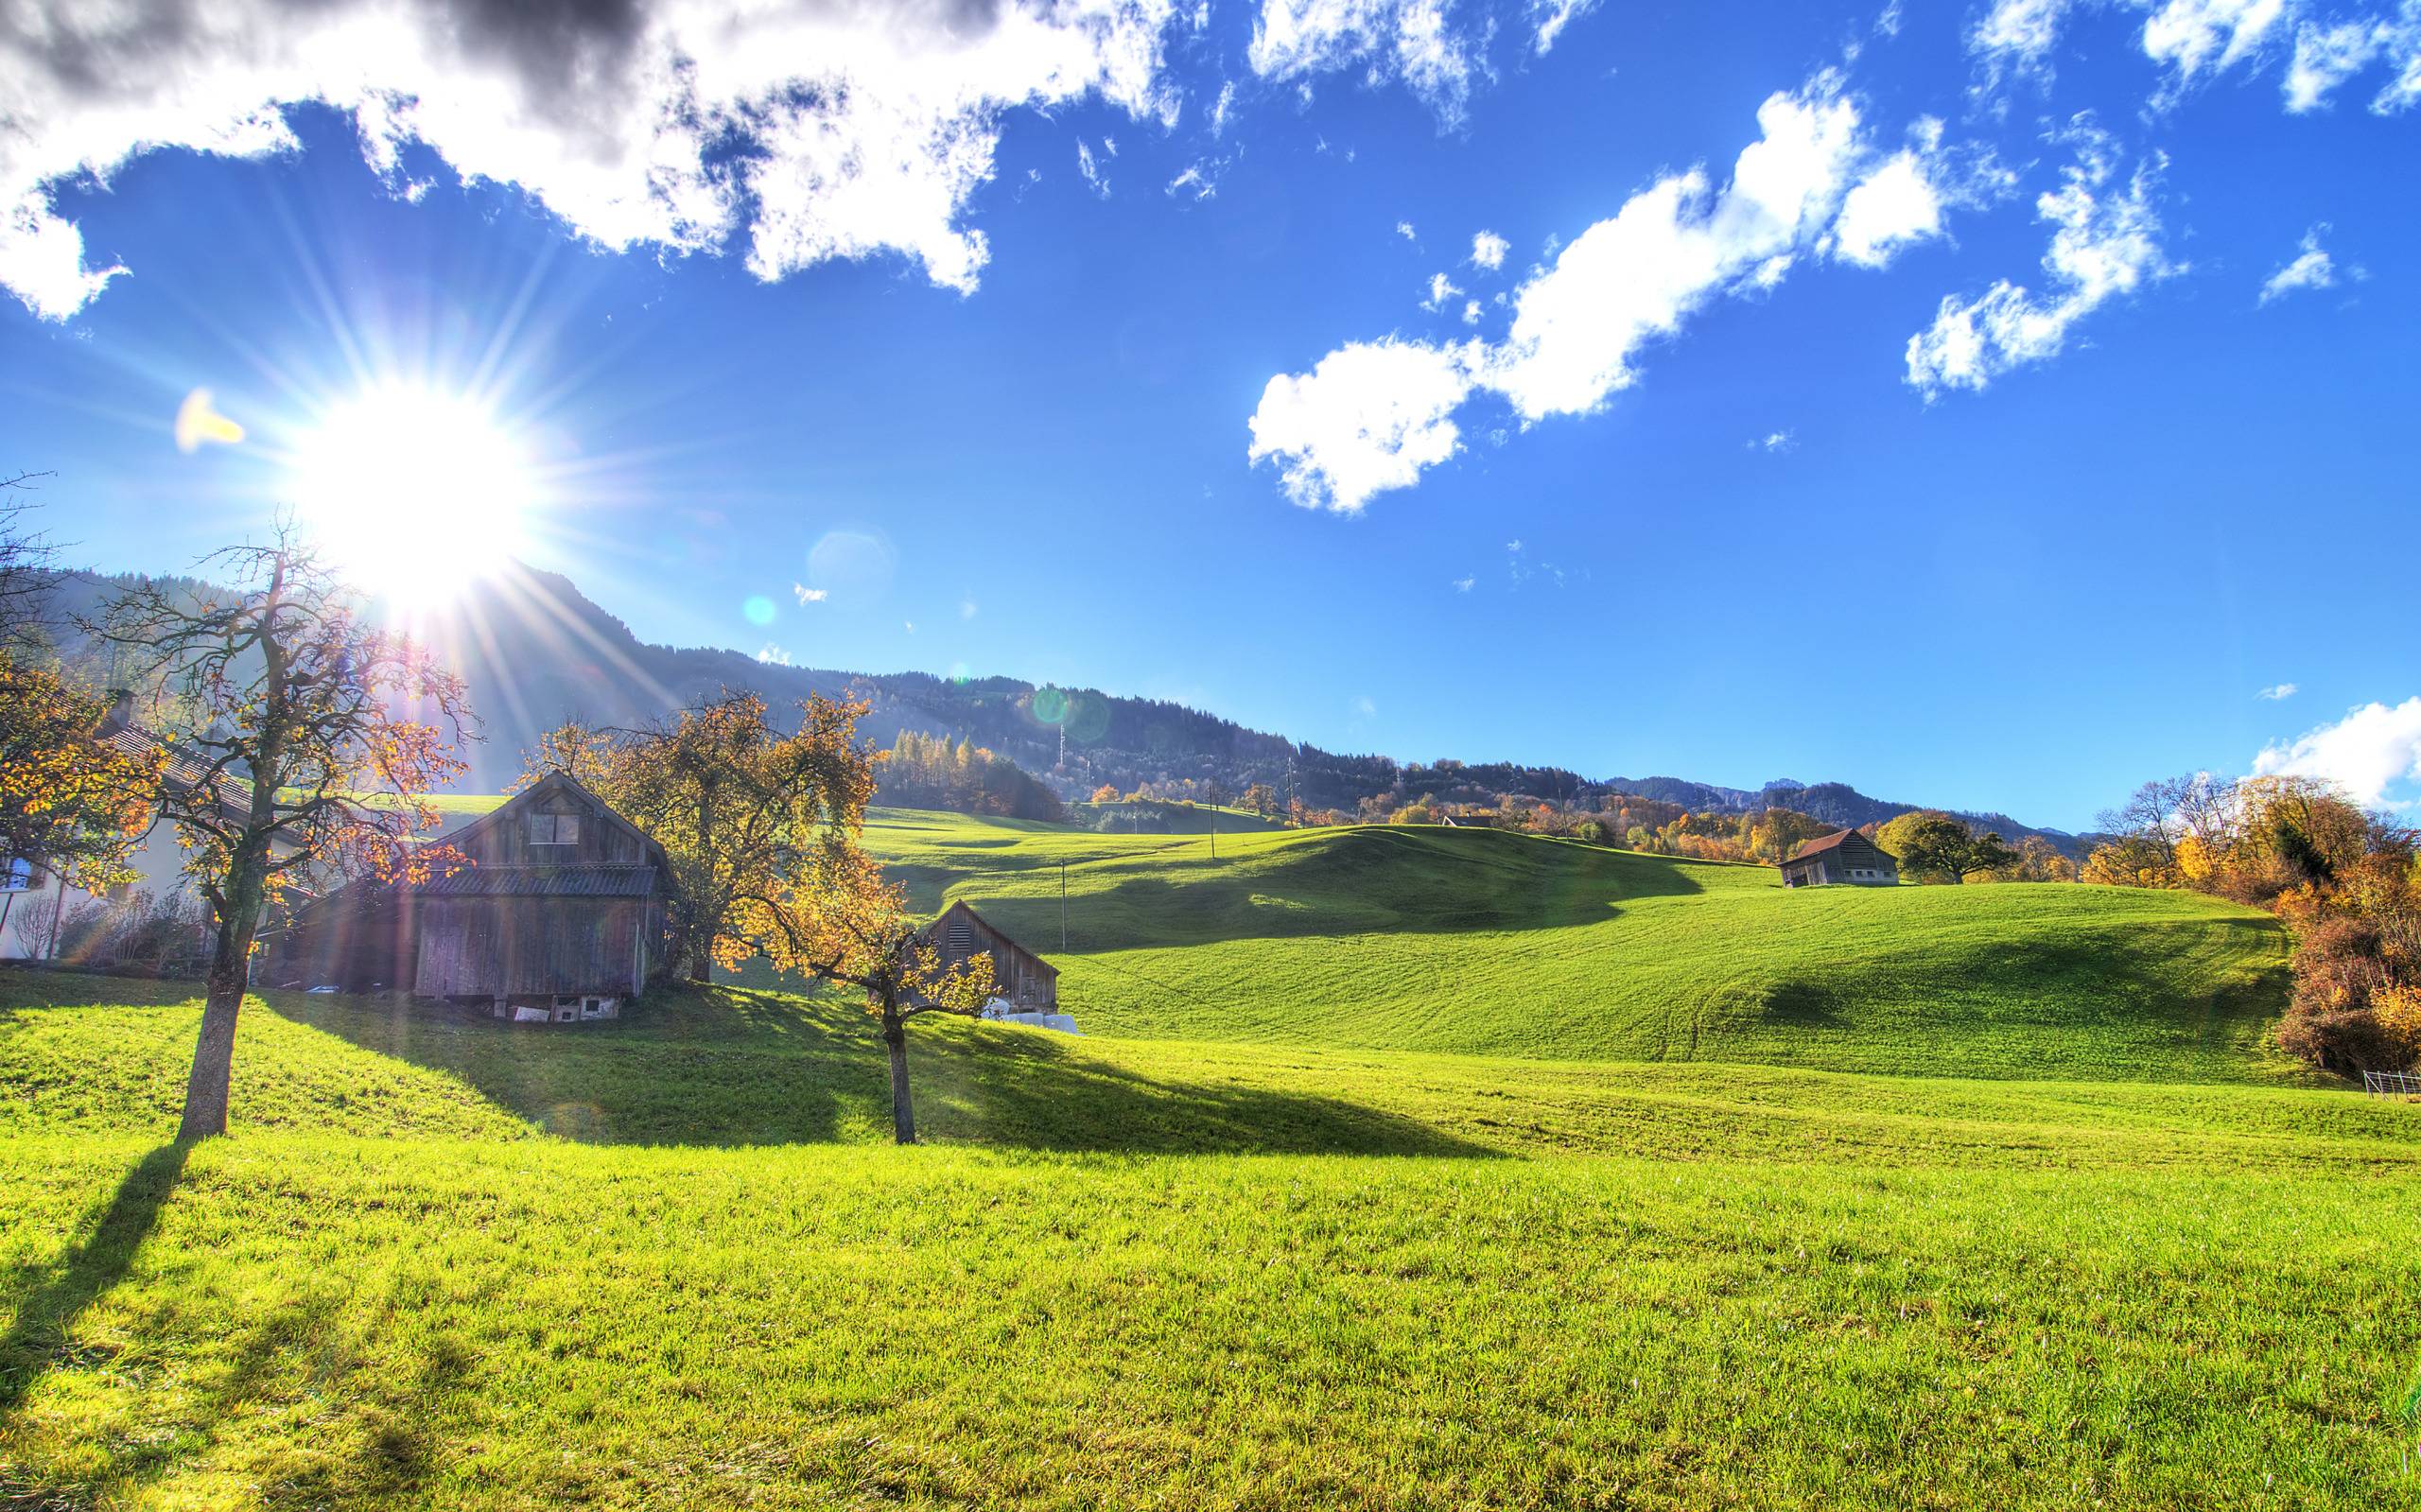 Sunny Autumn Day in the Country widescreen wallpaper. Wide